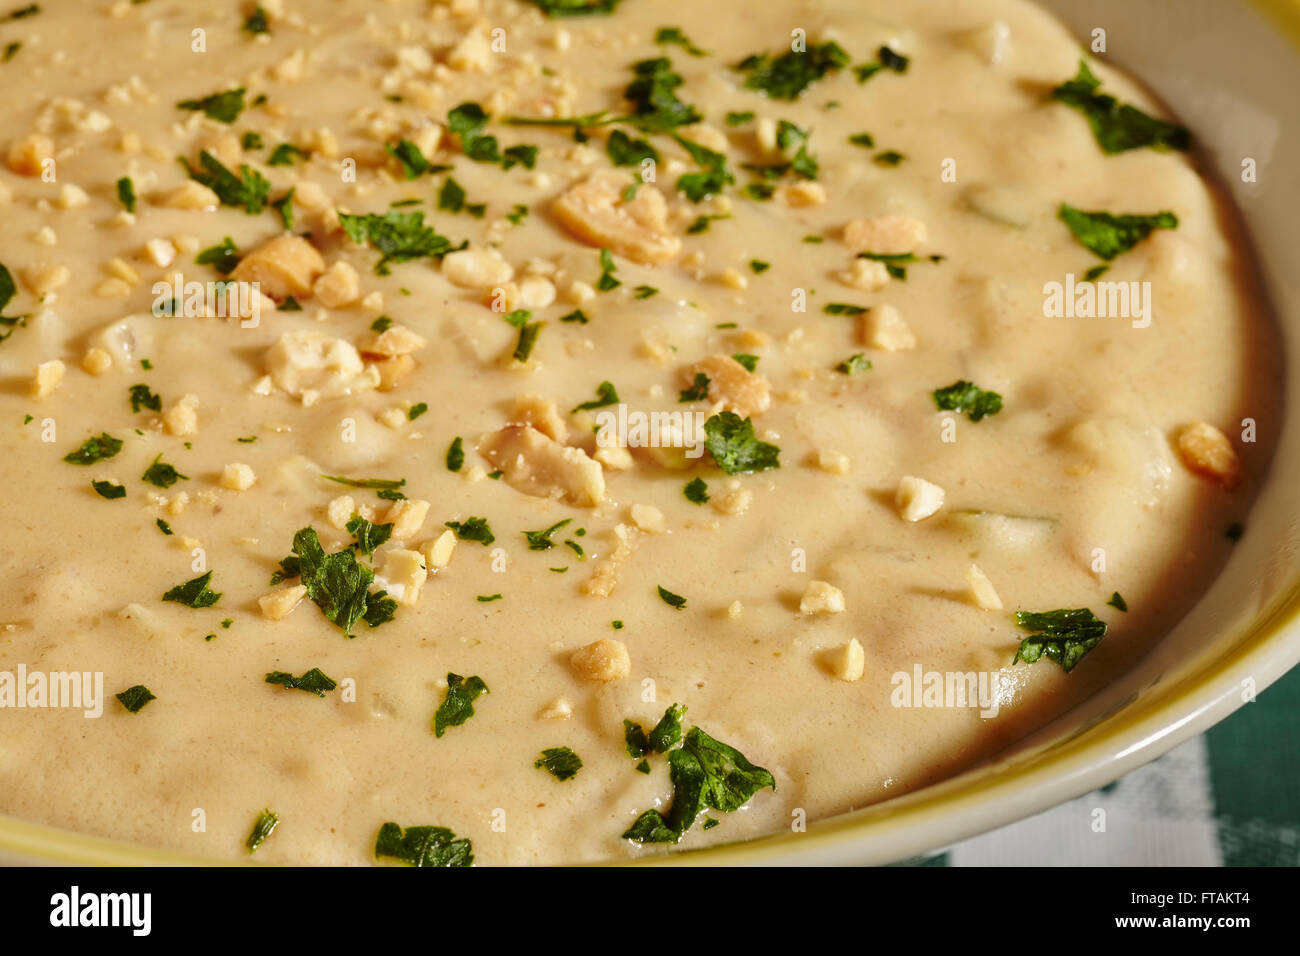 Peanut Soup, a regional dish from the American South Stock Photo